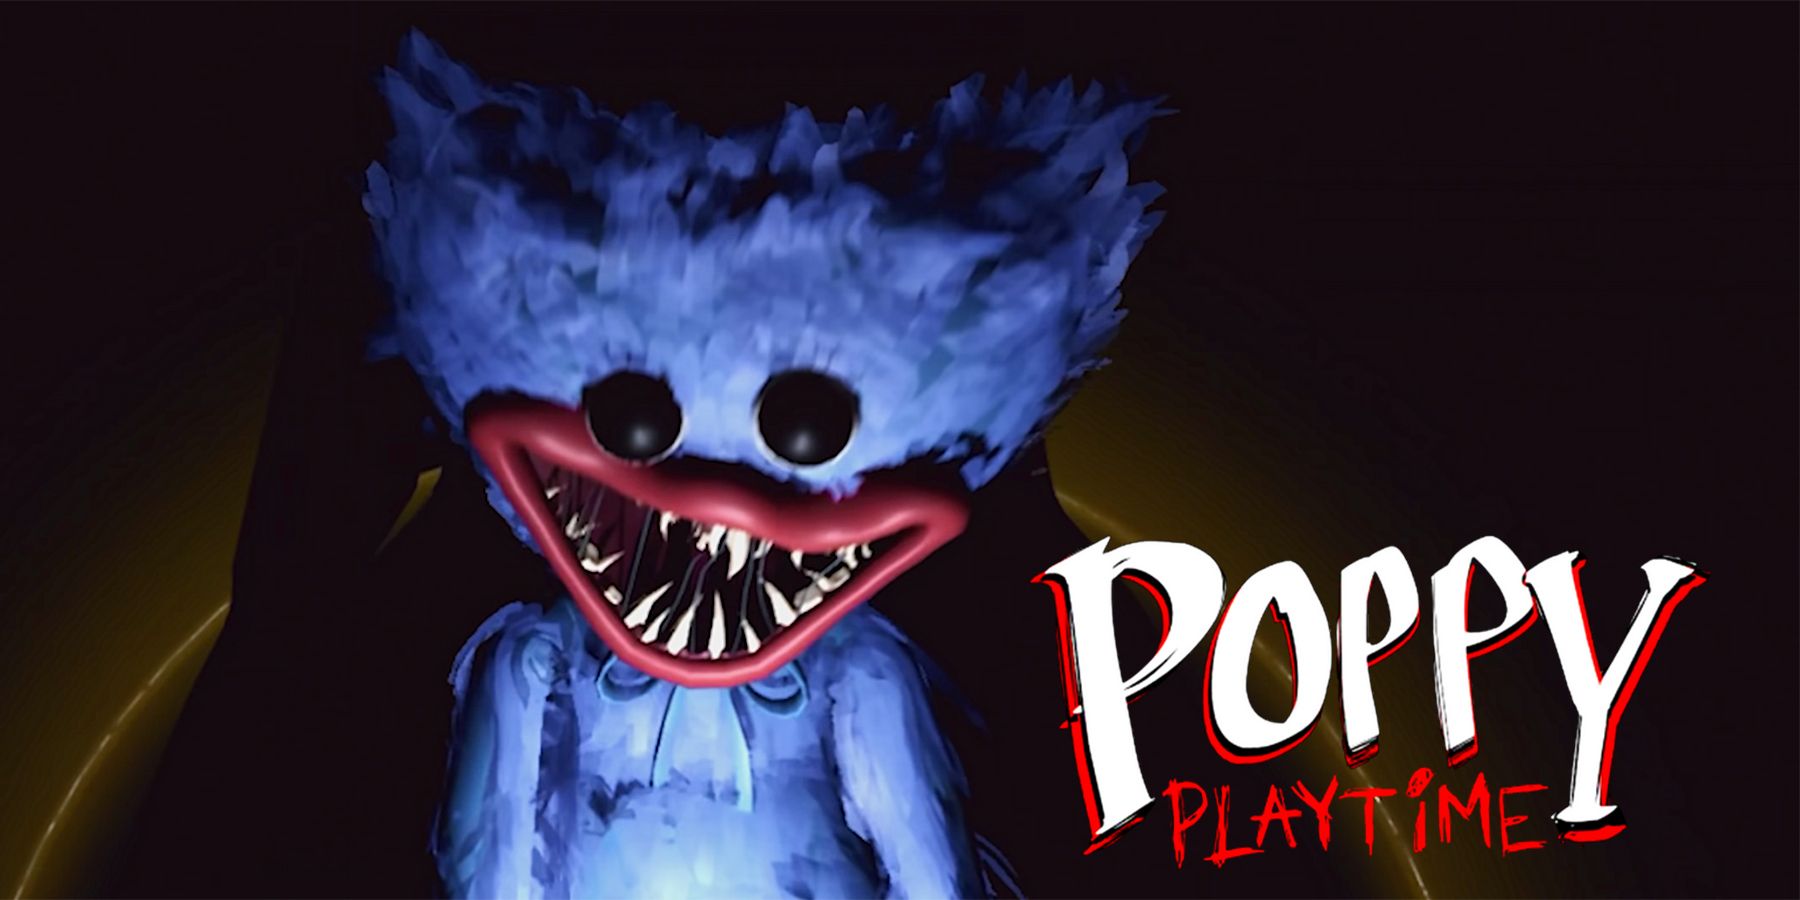 Poppy Playtime - Which Poppy Playtime Character is the scariest? 🤔